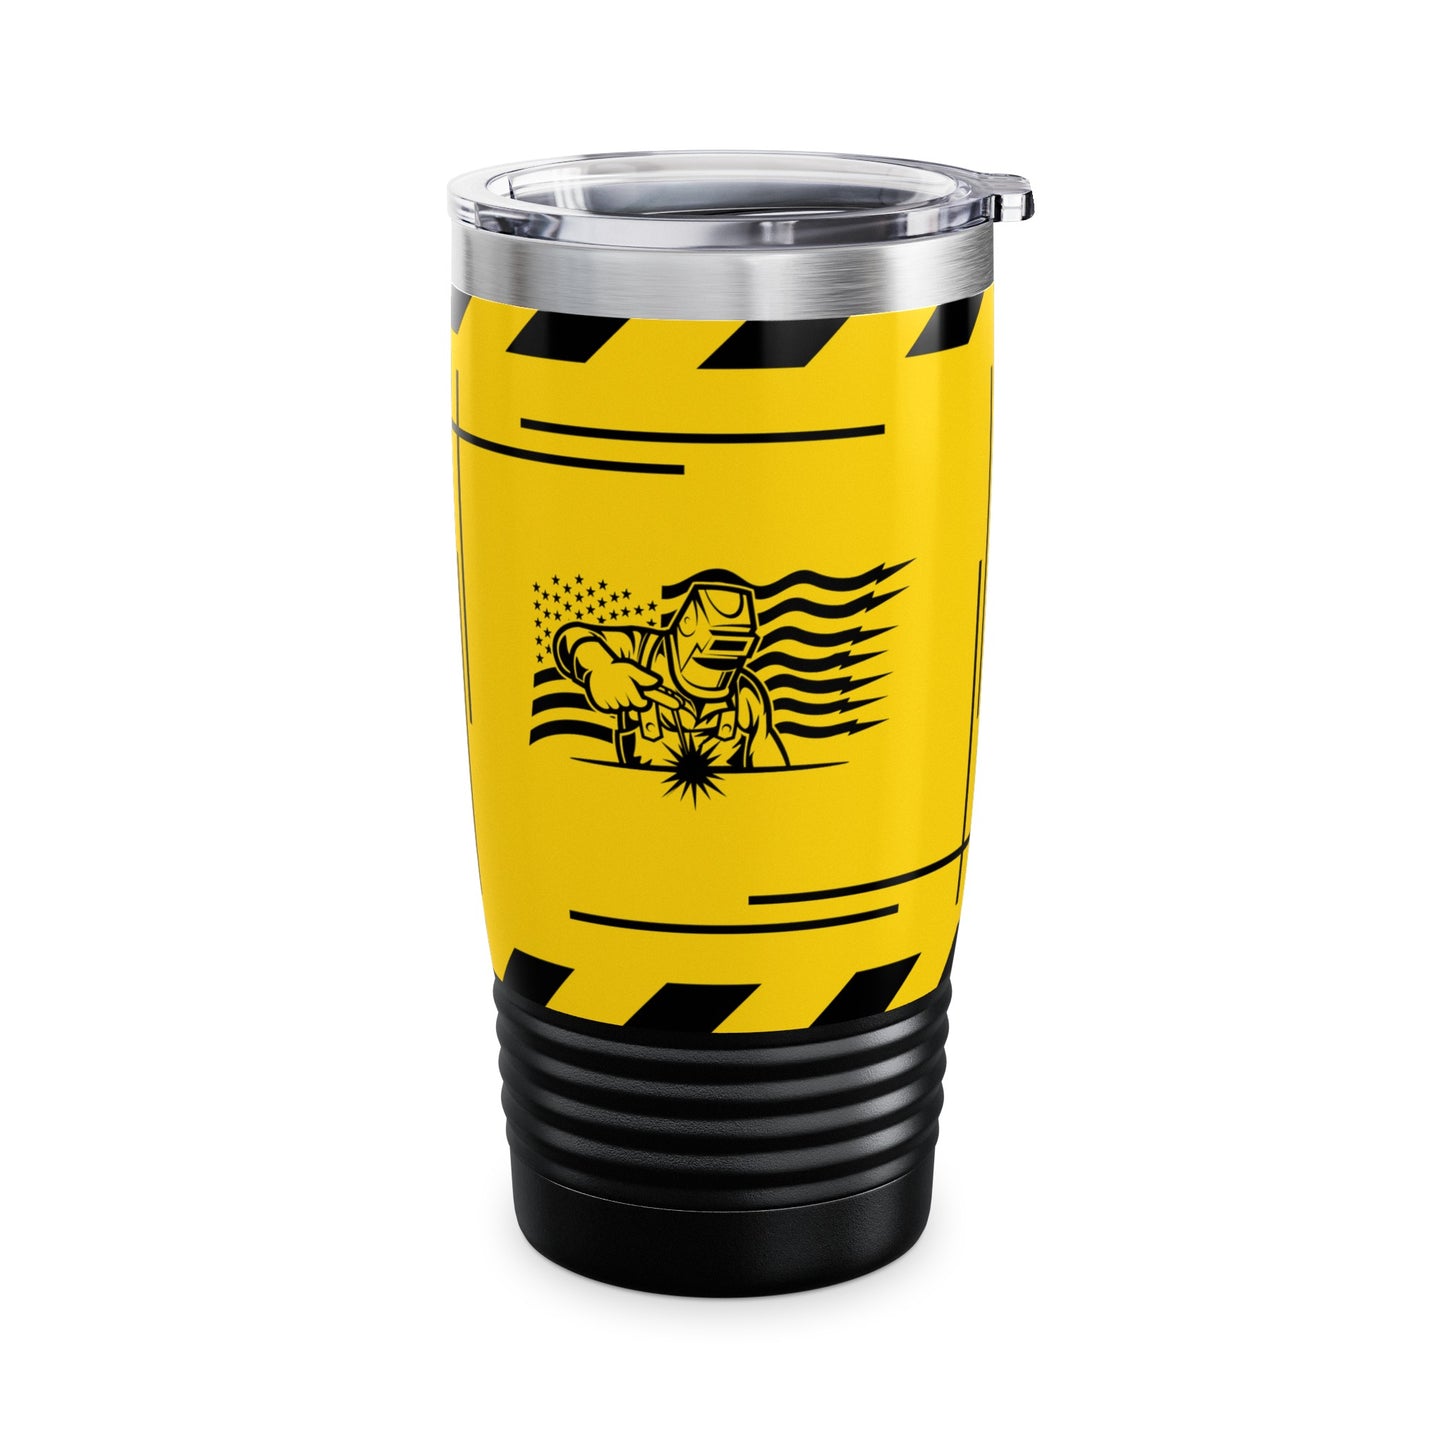 Relax, I'm A Union Welder, And I Know Things - Ringneck Tumbler, 20oz